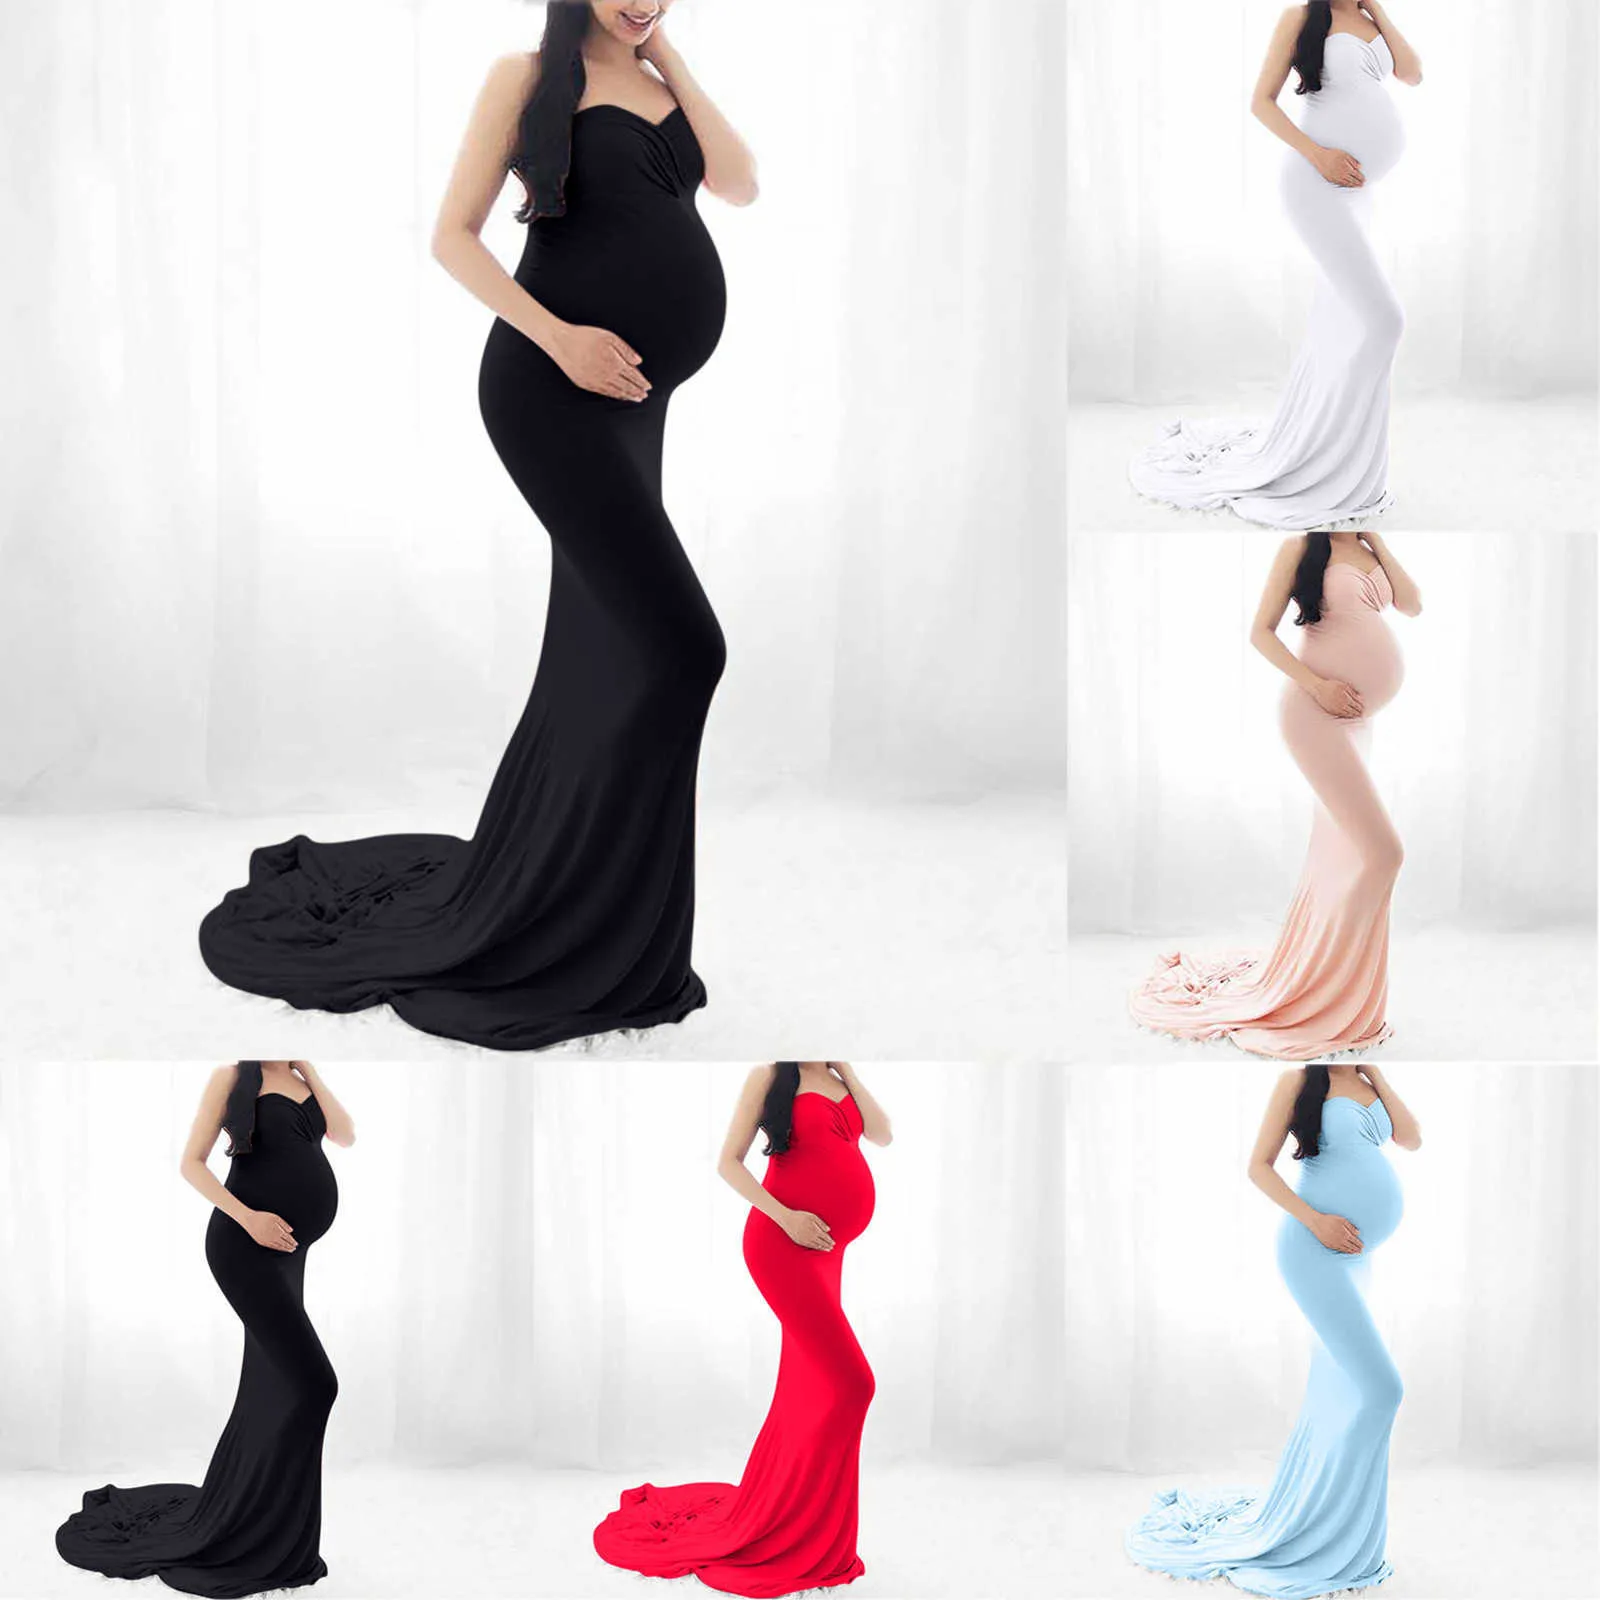 Sexy Maternity Dresses For Photo Shoot Chiffon Pregnancy Dress Photography Prop Maxi Gown Dresses For Pregnant Women Clothes X0902